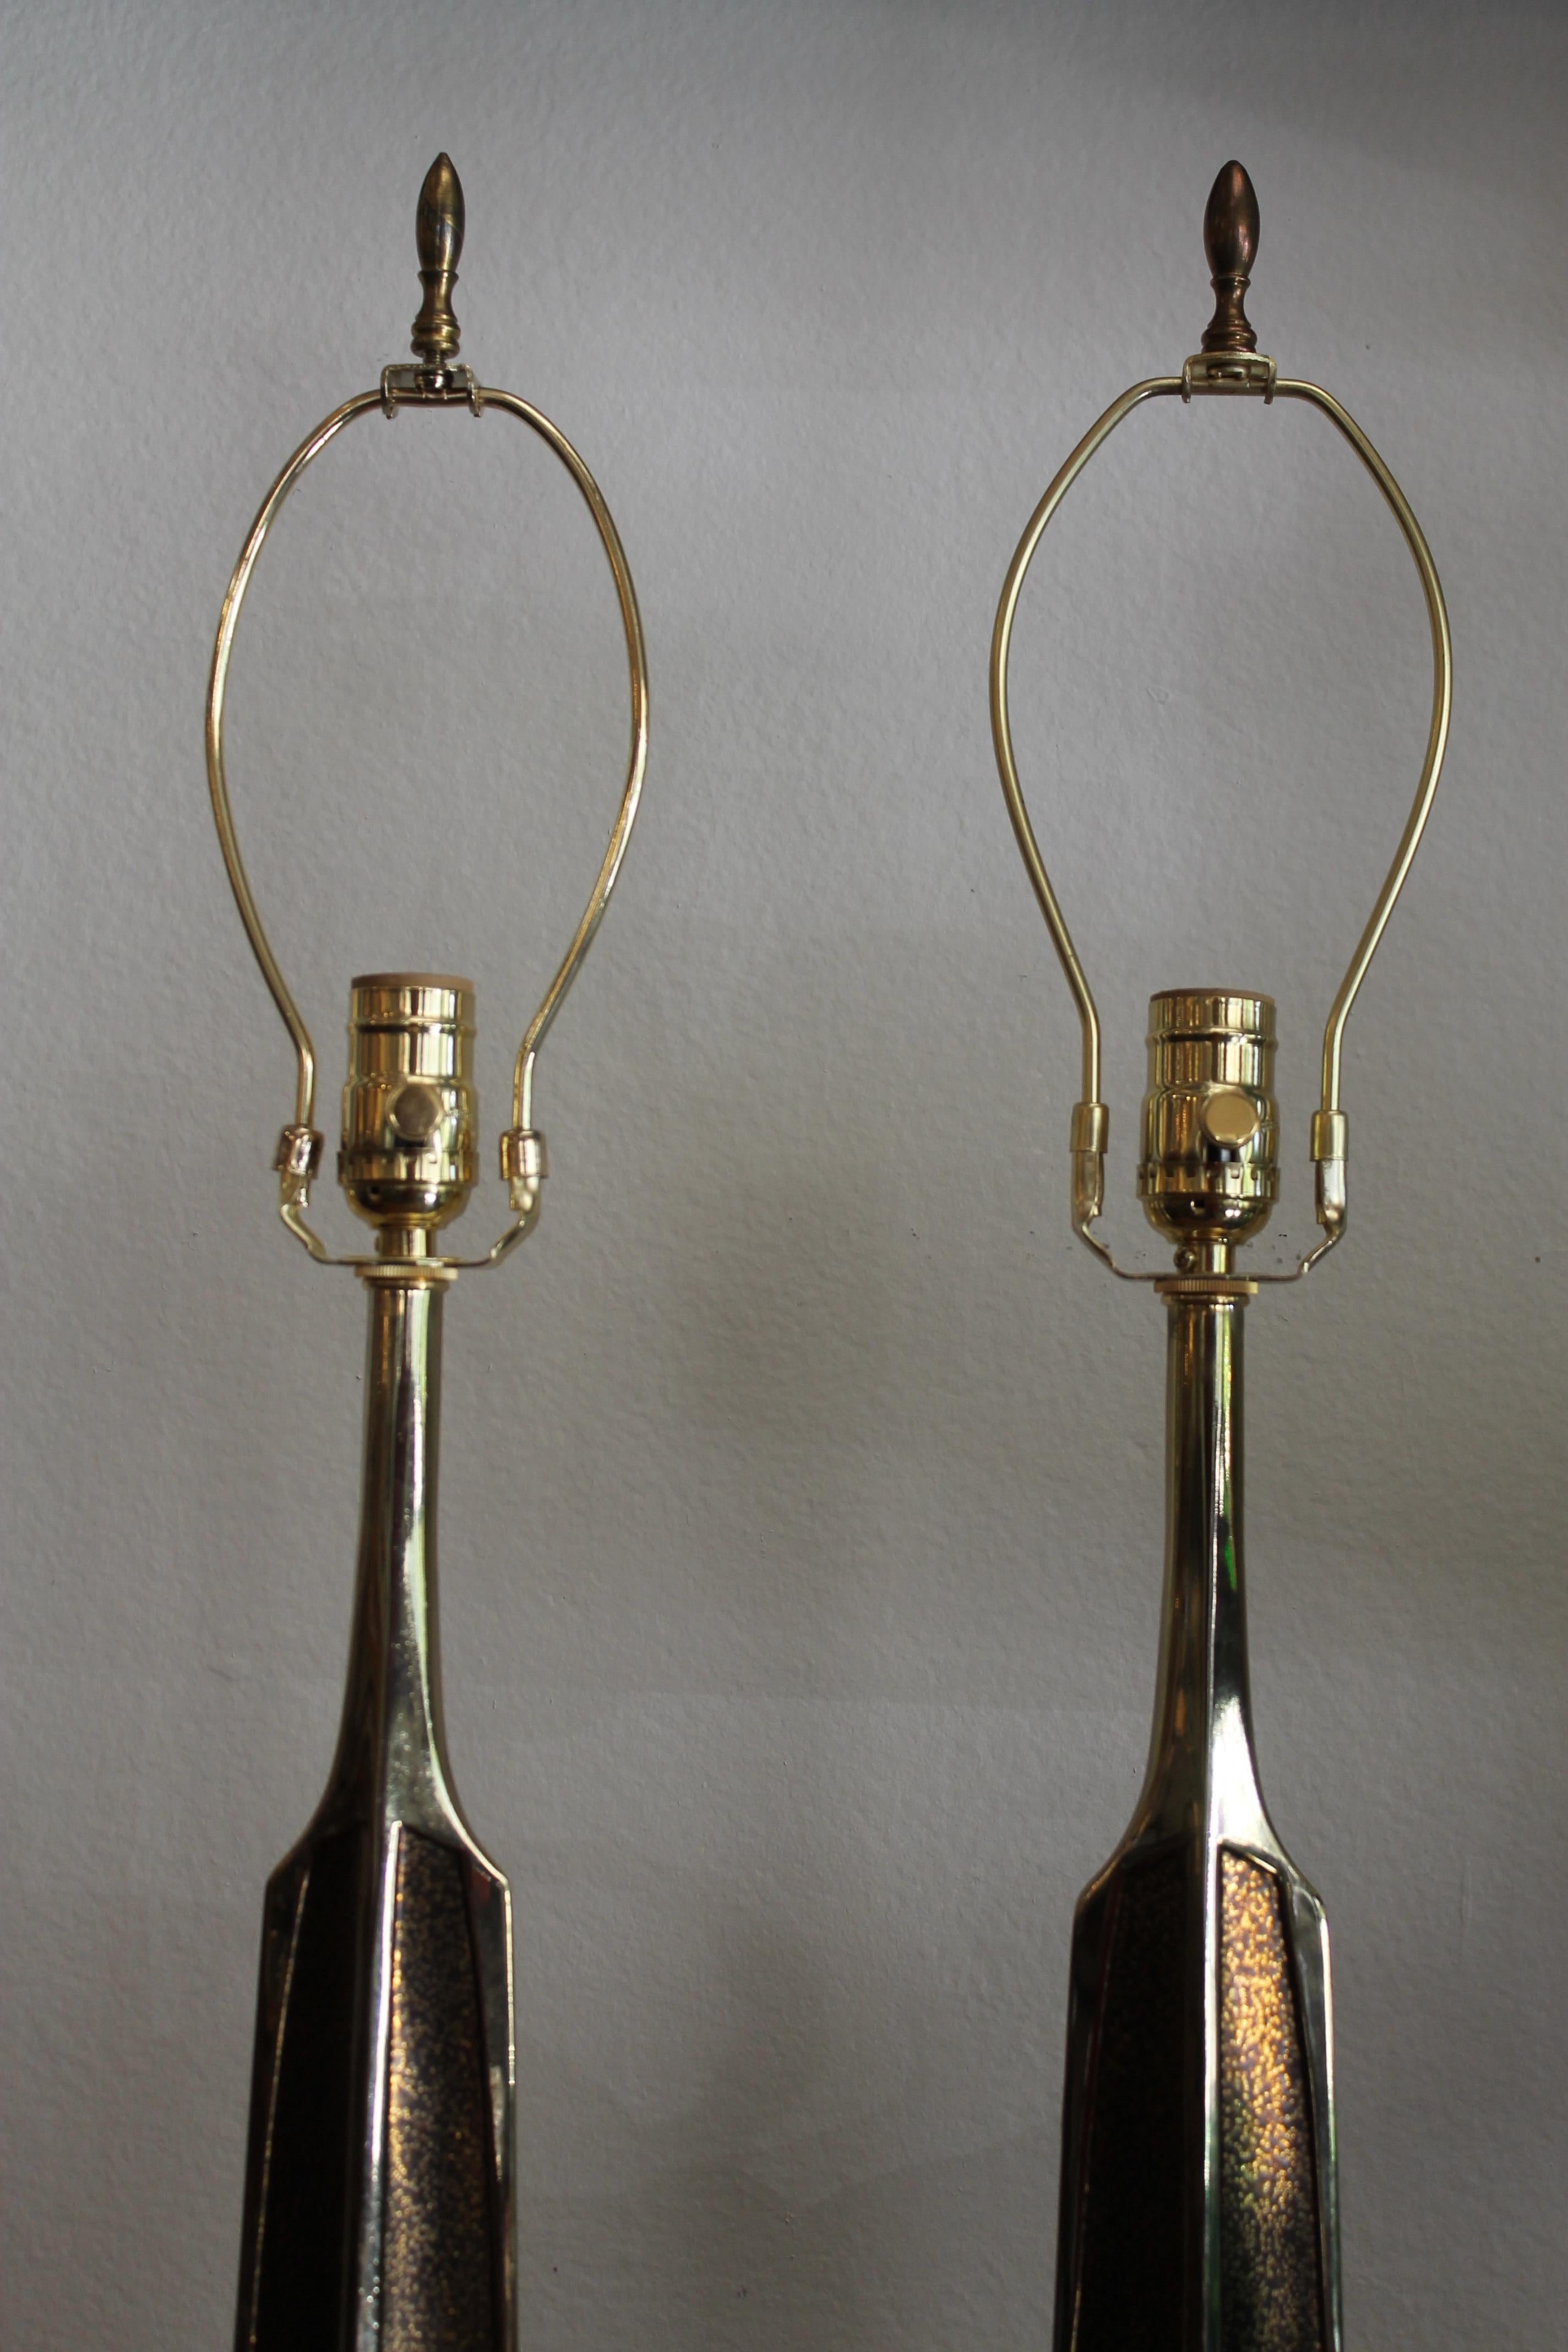 American Pair of Lamps for the Laurel Lamp Co.